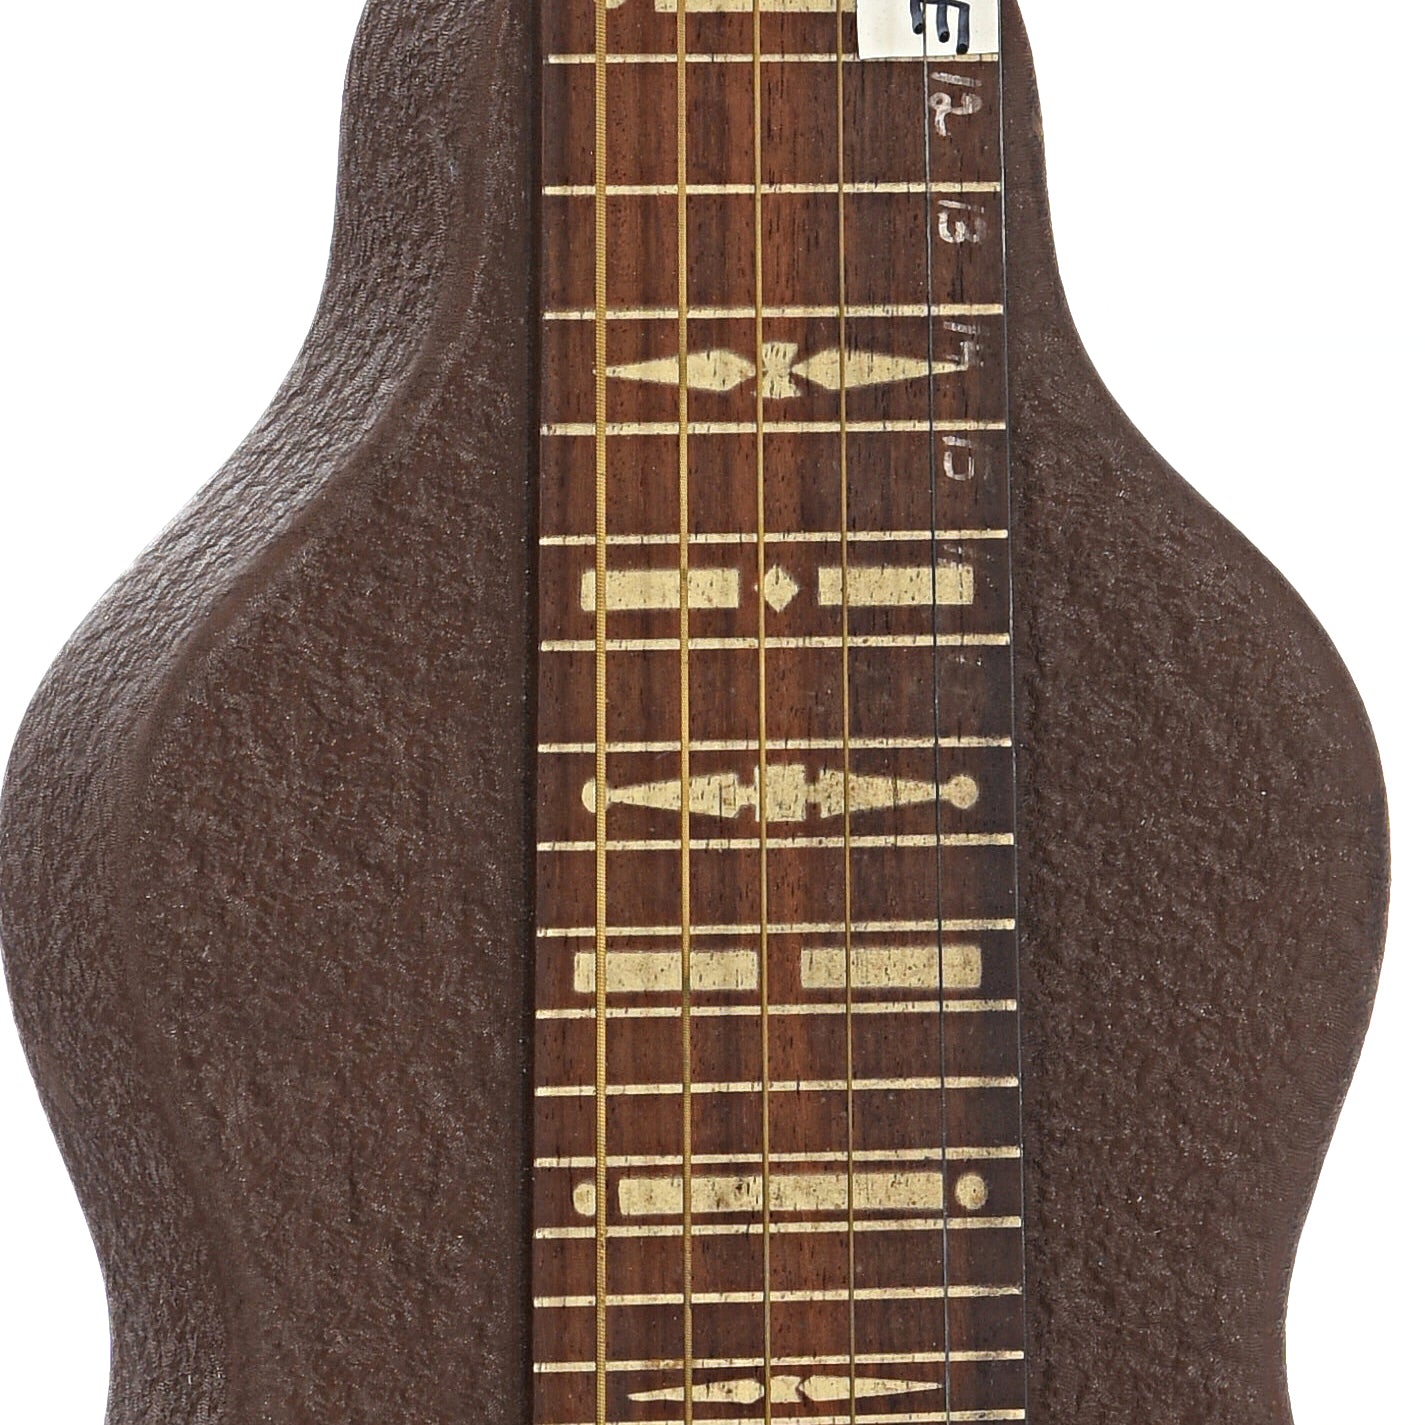 Center section of Mastertone Special MEH-100 Lap Steel 